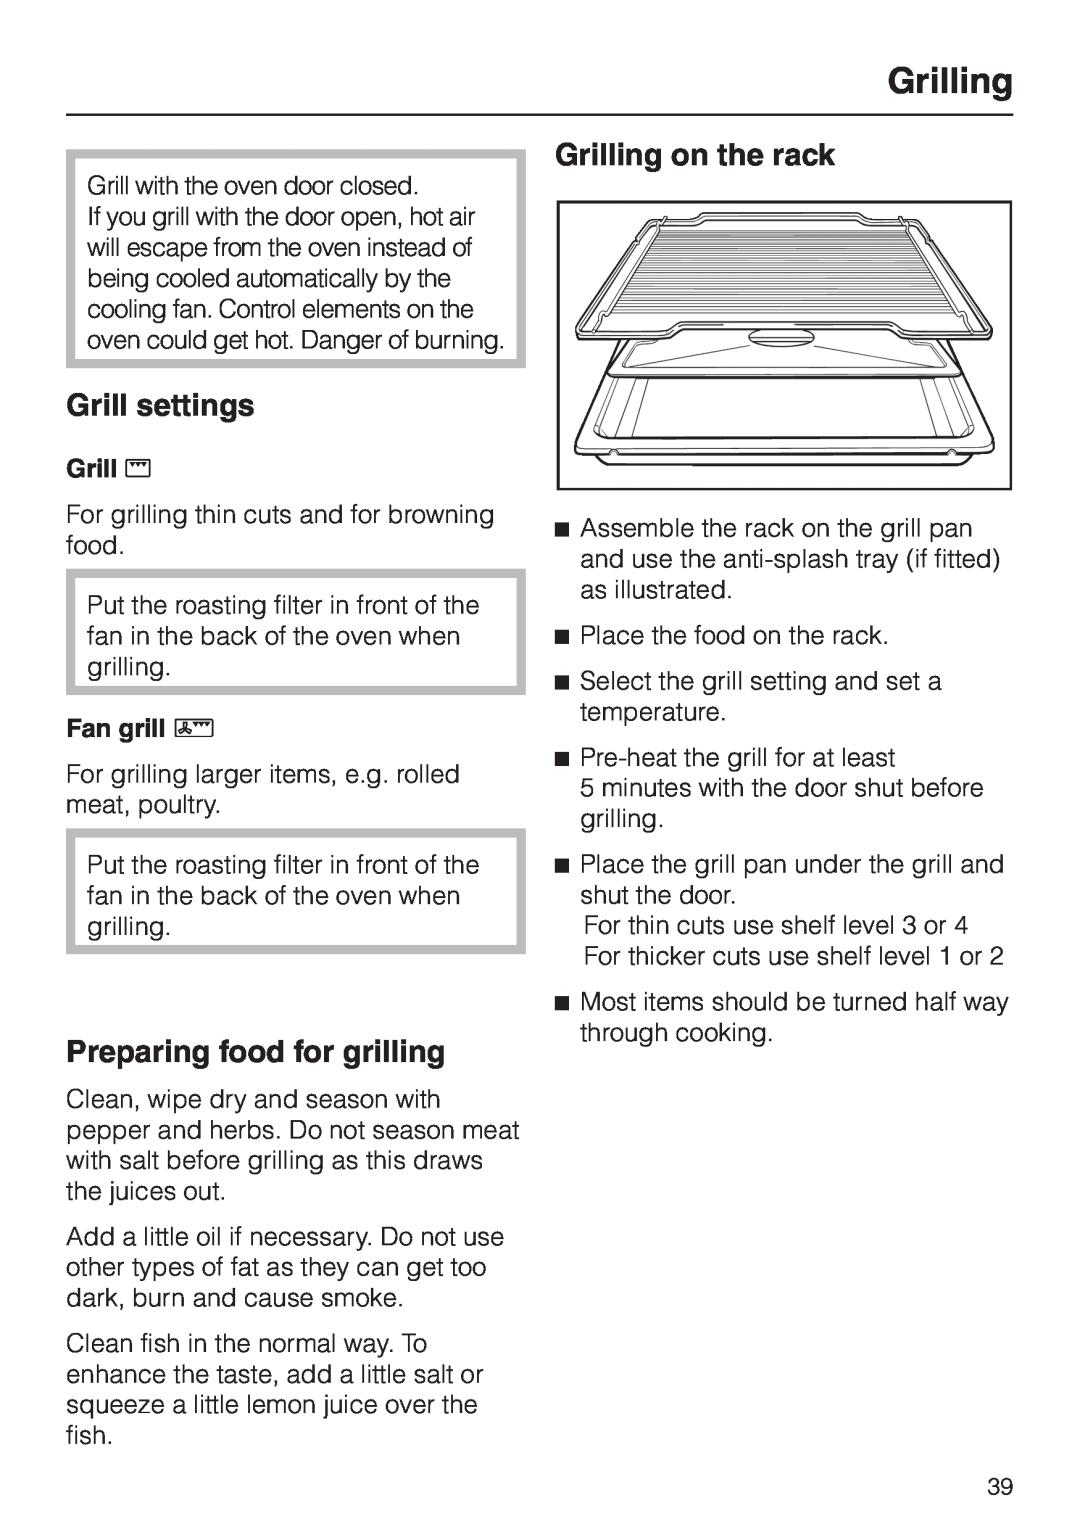 Miele H 4240, H 4150, H 4220 Grill settings, Preparing food for grilling, Grilling on the rack, Grill n, Fan grill N 